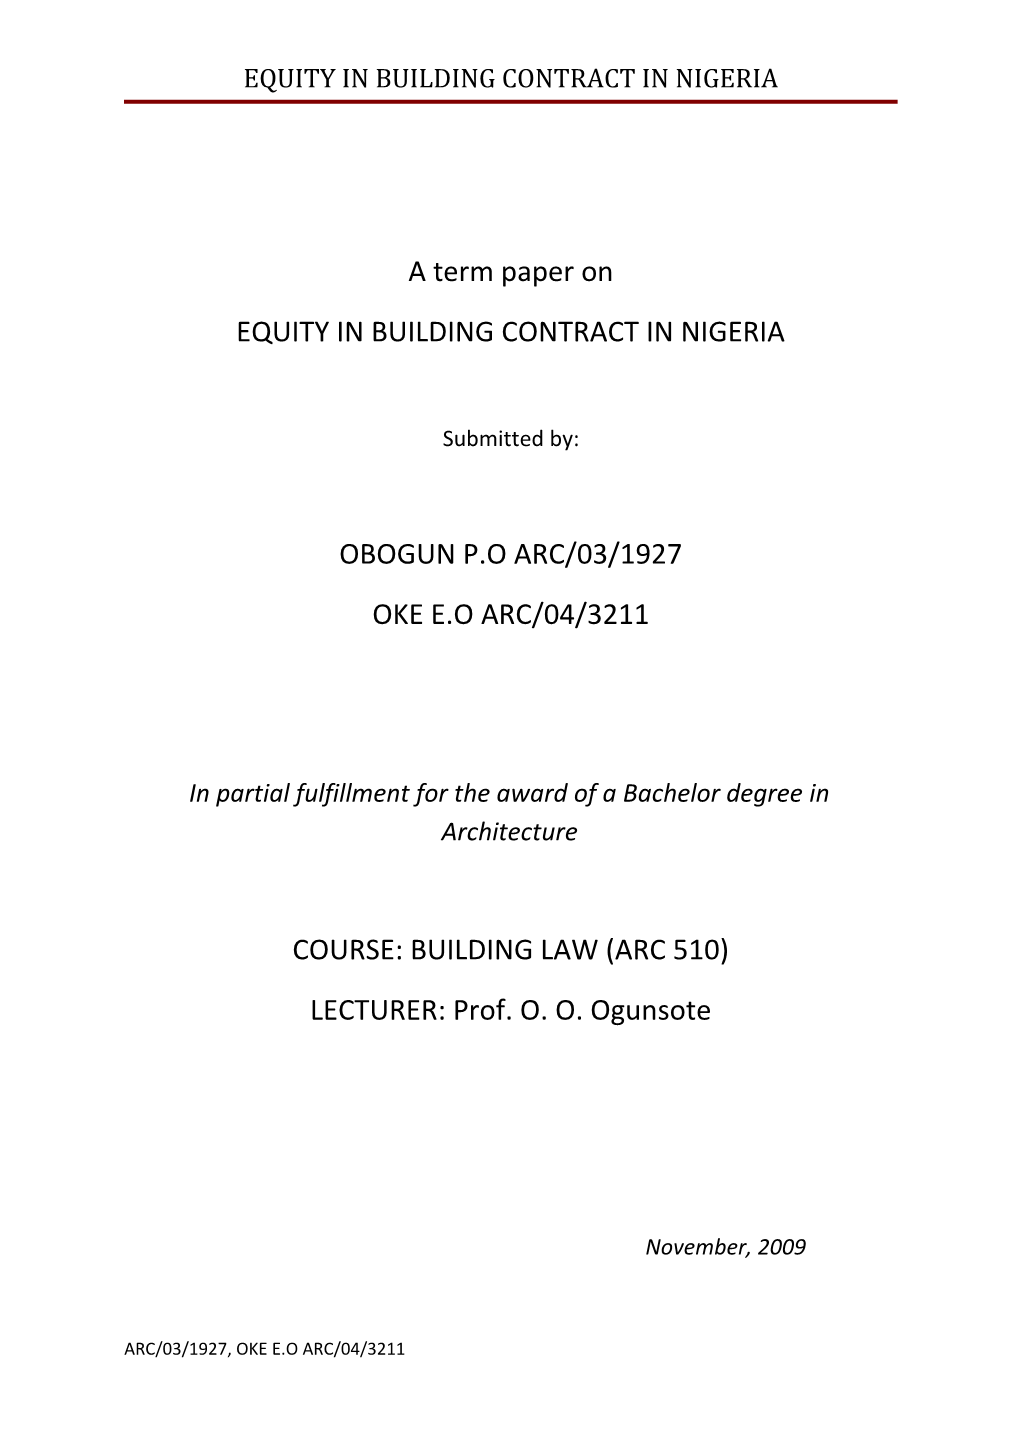 Equity in Building Contract in Nigeria